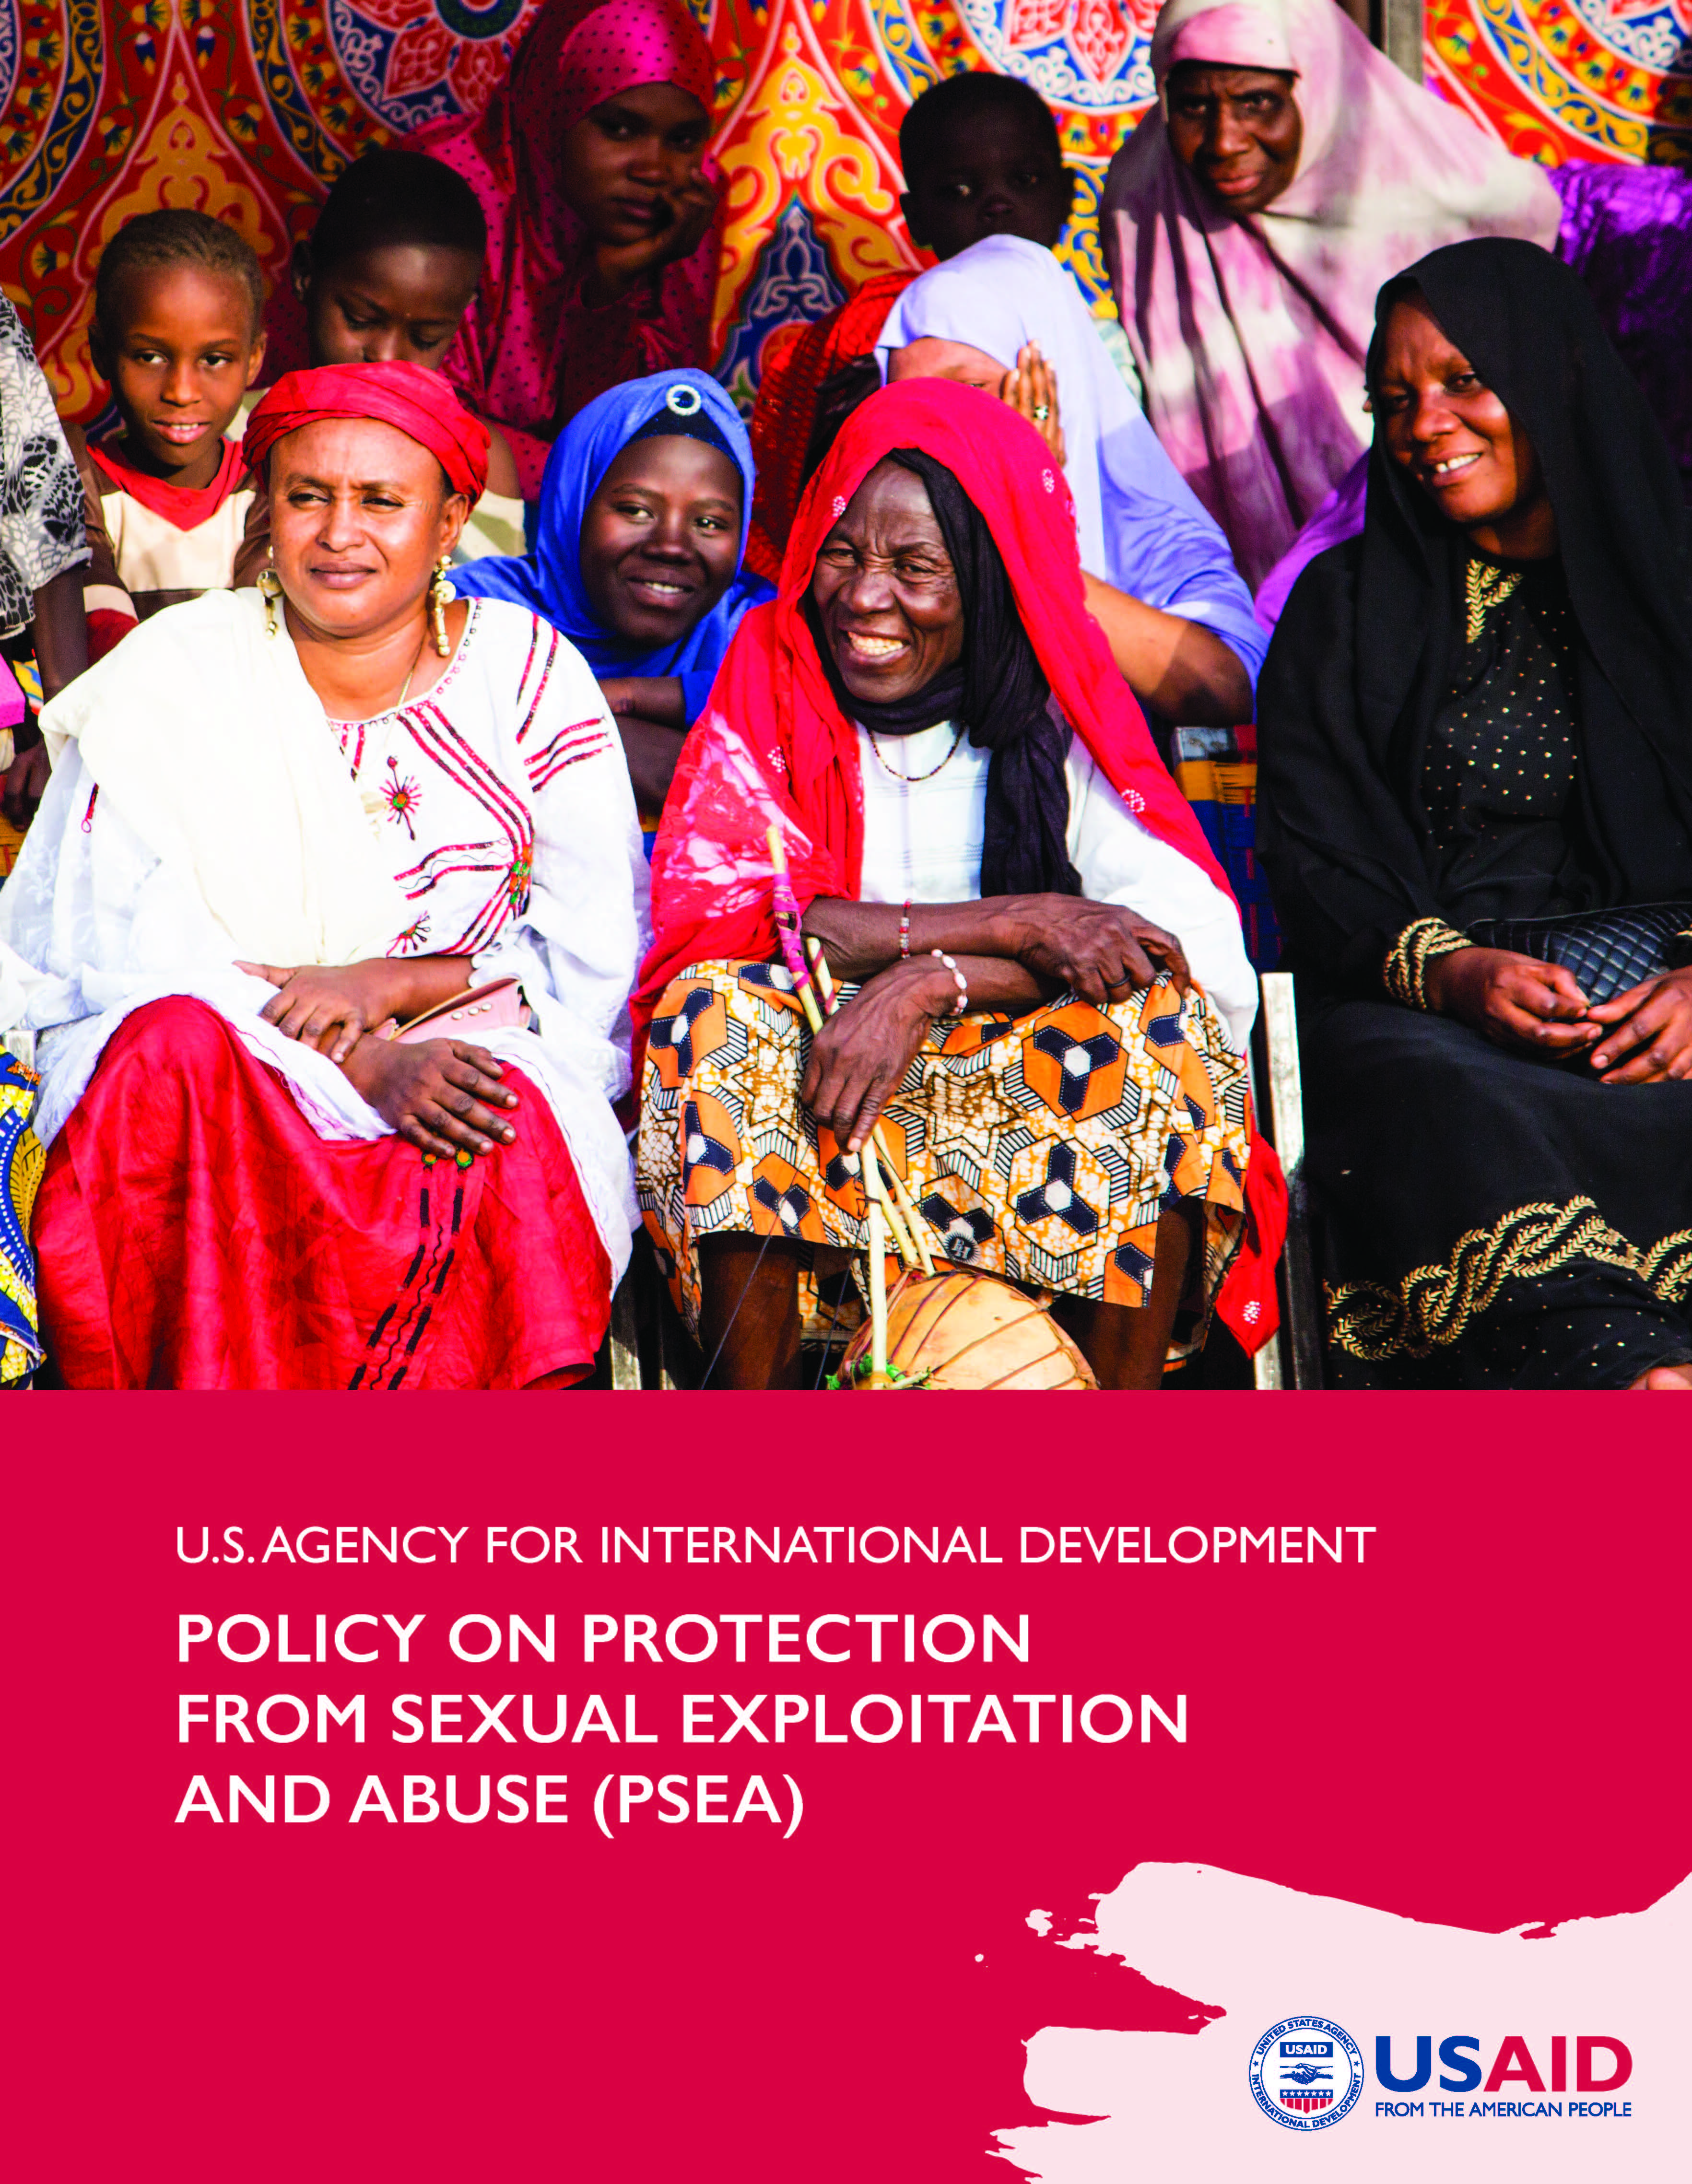 USAID’s Protection From Sexual Exploitation and Abuse (PSEA) Policy